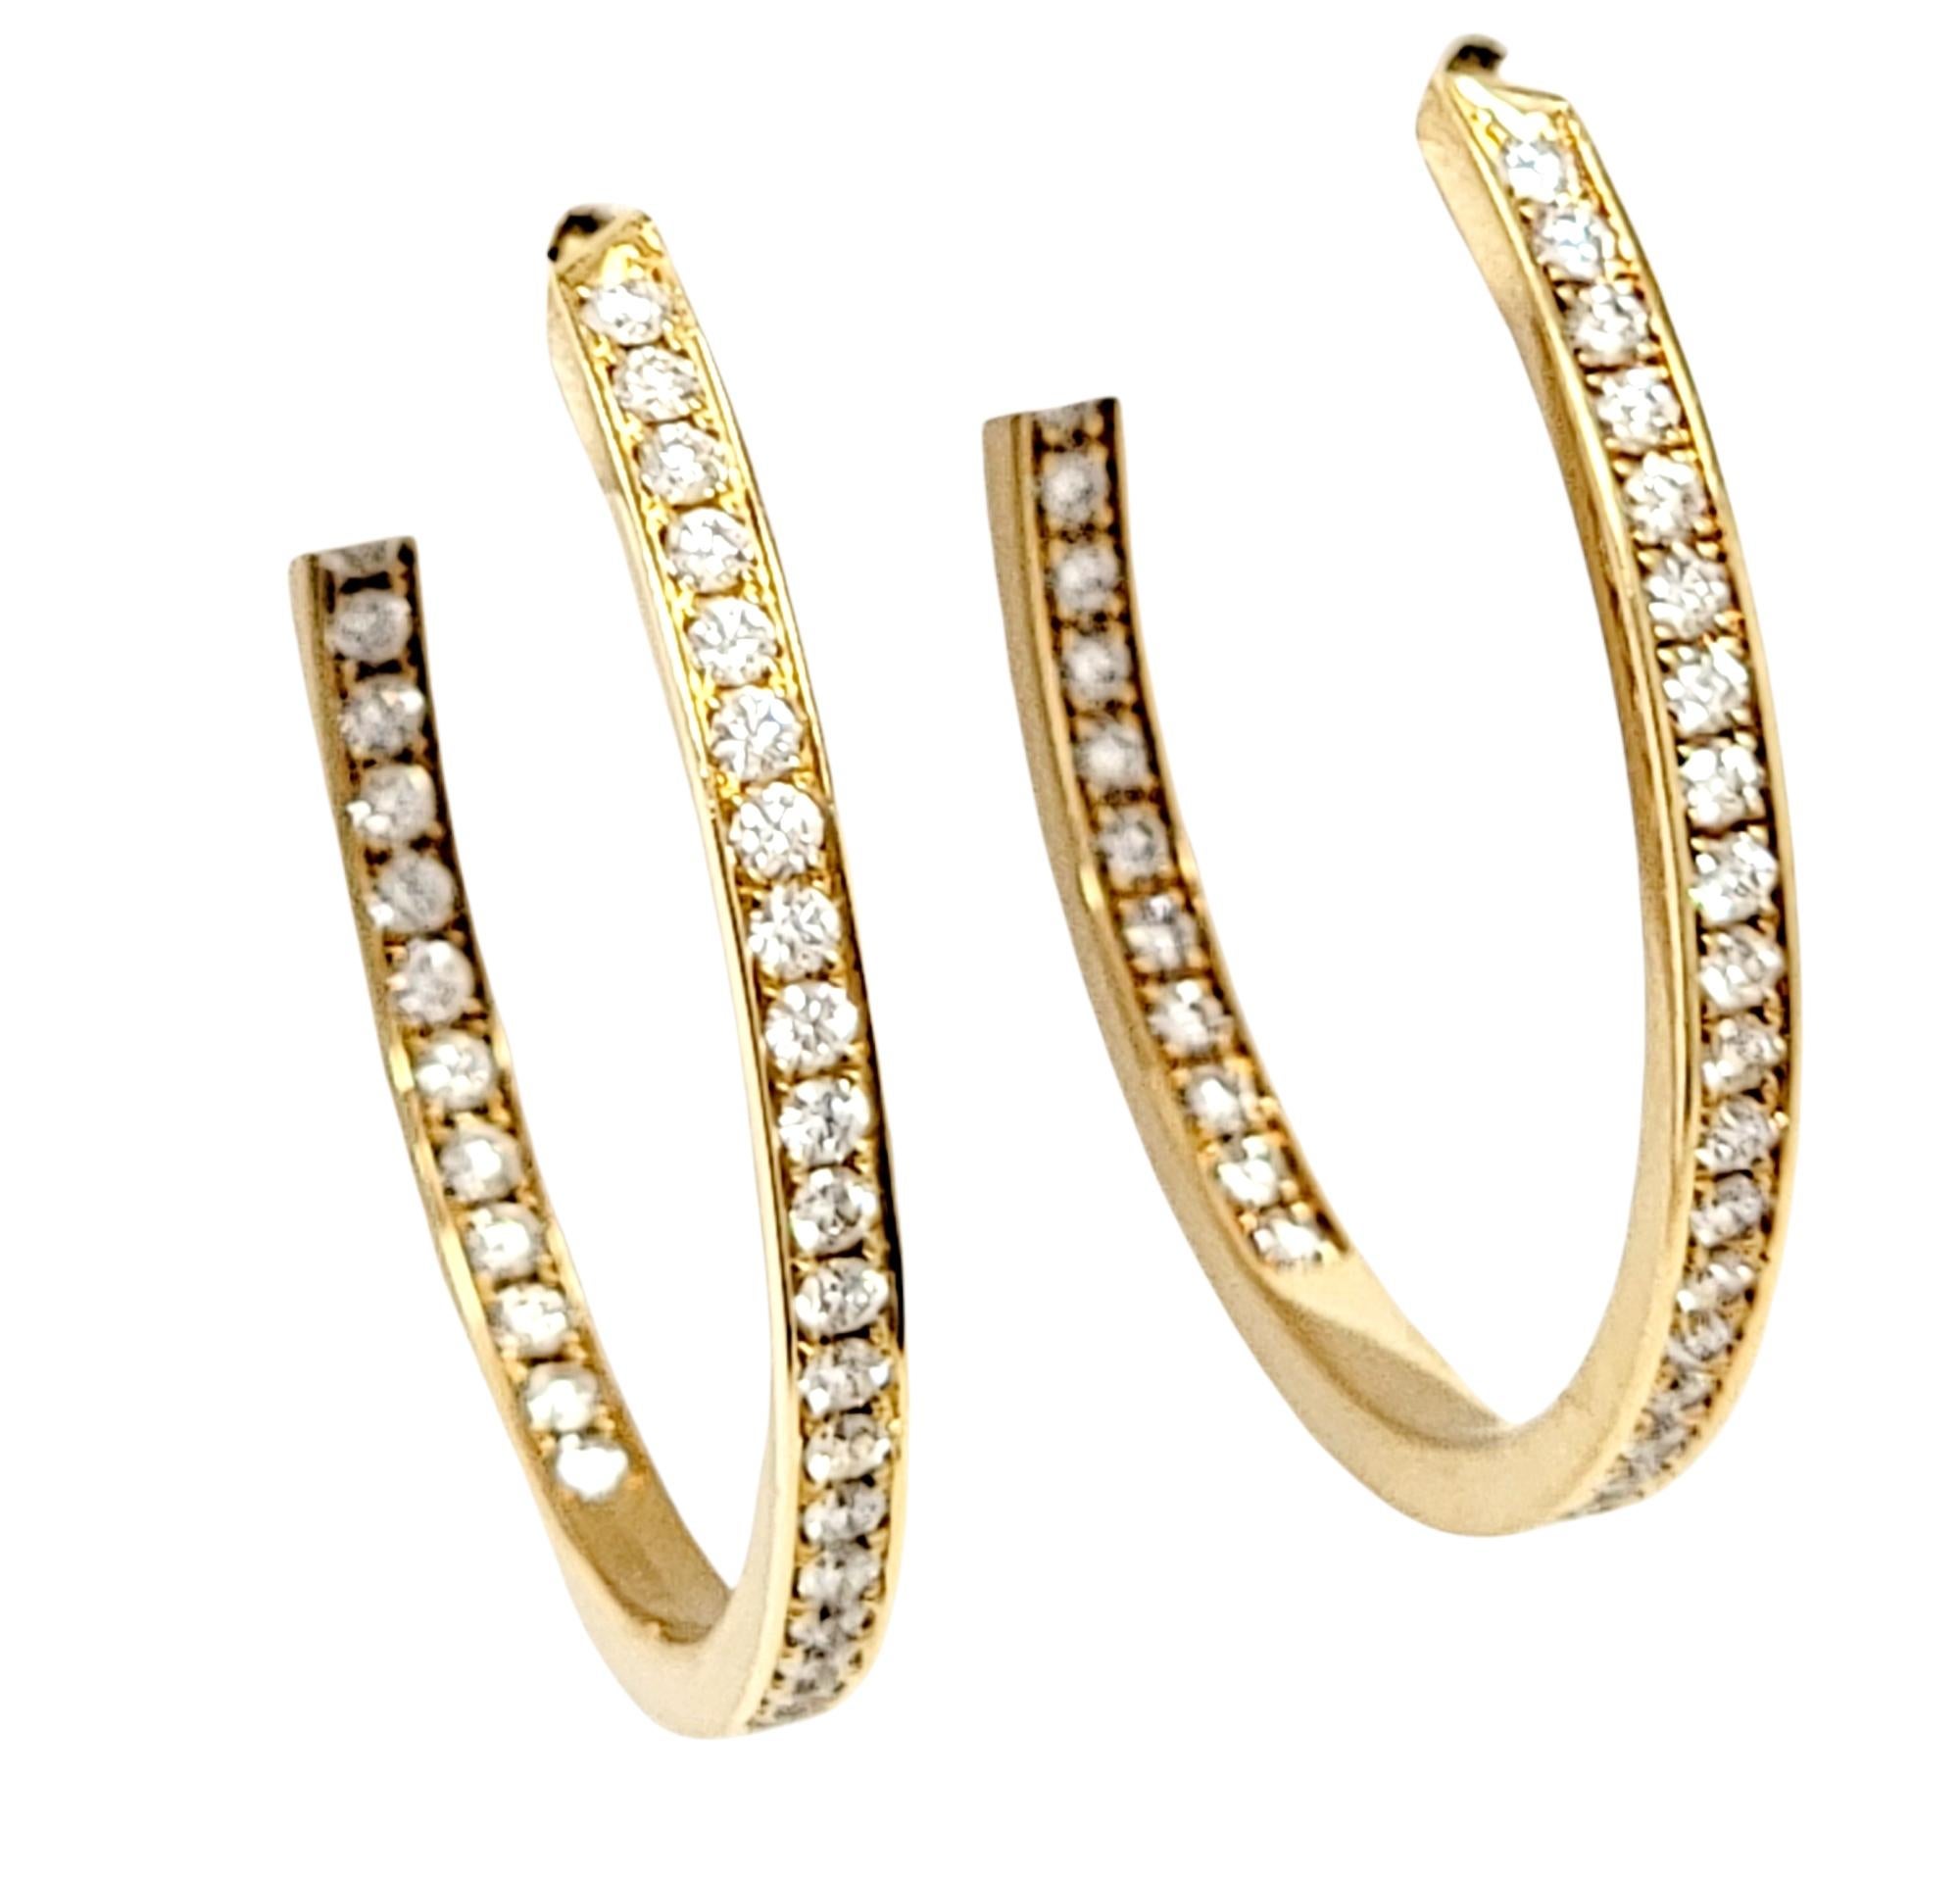 Absolutely gorgeous pave diamond hoop earrings by renowned jeweler, Cartier. The impressive pair are arranged in a stunning inside/outside setting, so the diamonds are positioned to catch the light from all angles. Hanging just under 1.5 inches